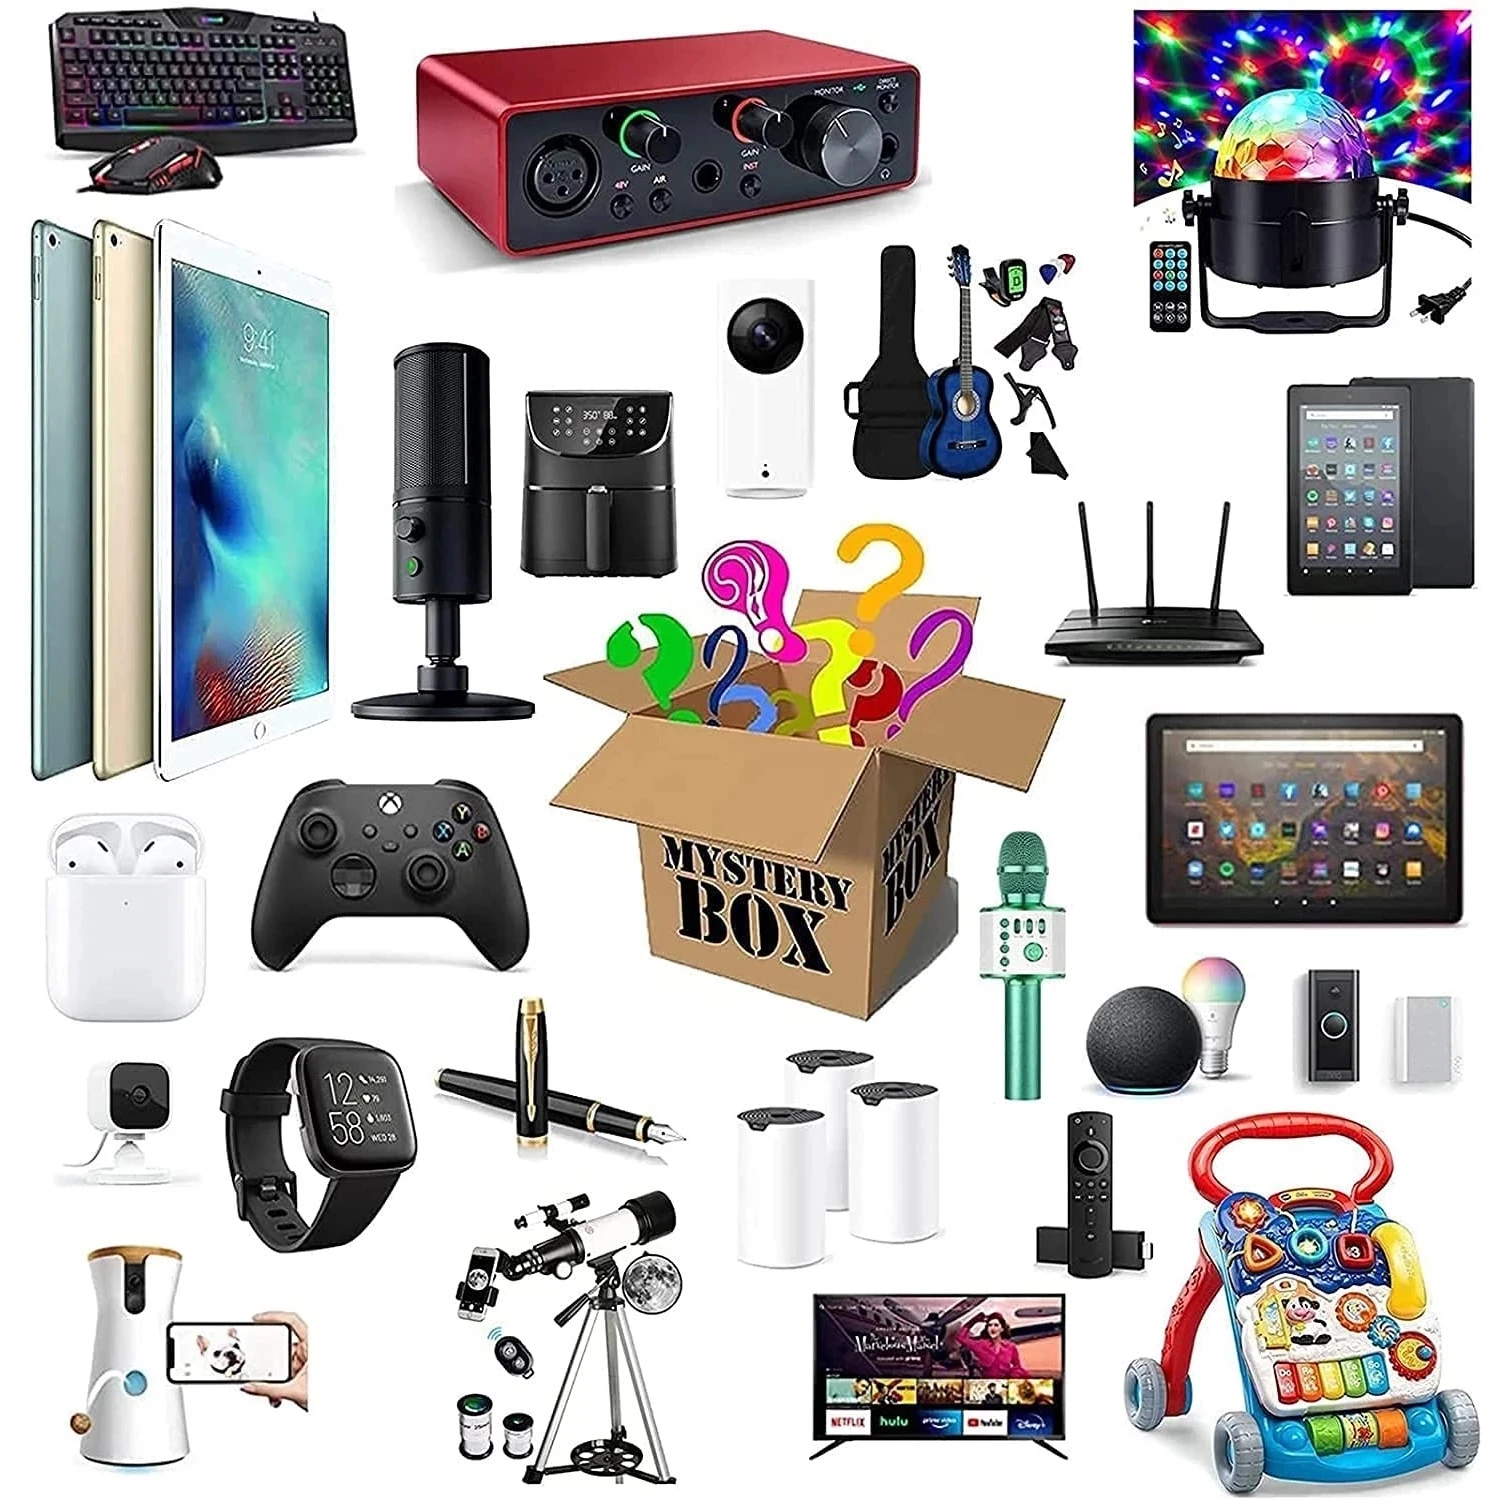 

More Random Digital Home Electronics Gift Boxes Waiting For You2021 Novelty Surprise Lucky Mystery Box 100% Winning,